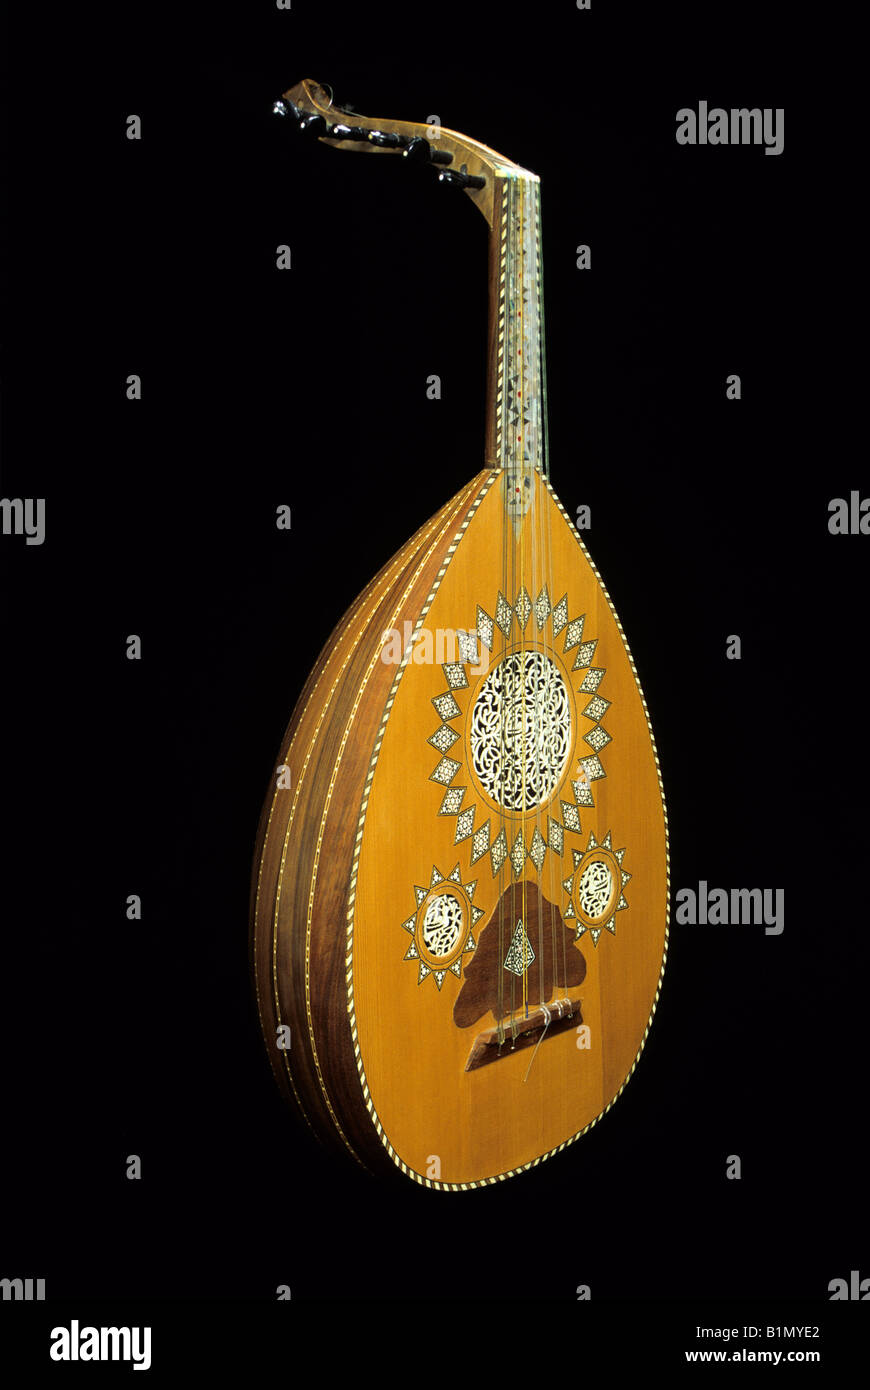 Syrian Oud or 'Ud, made in Damascus, with ivory and mother-of-pearl decoration.  CANNOT BE LICENSED FOR BOOK FRONT COVER BEFORE 27 NOVEMBER 2045. Stock Photo